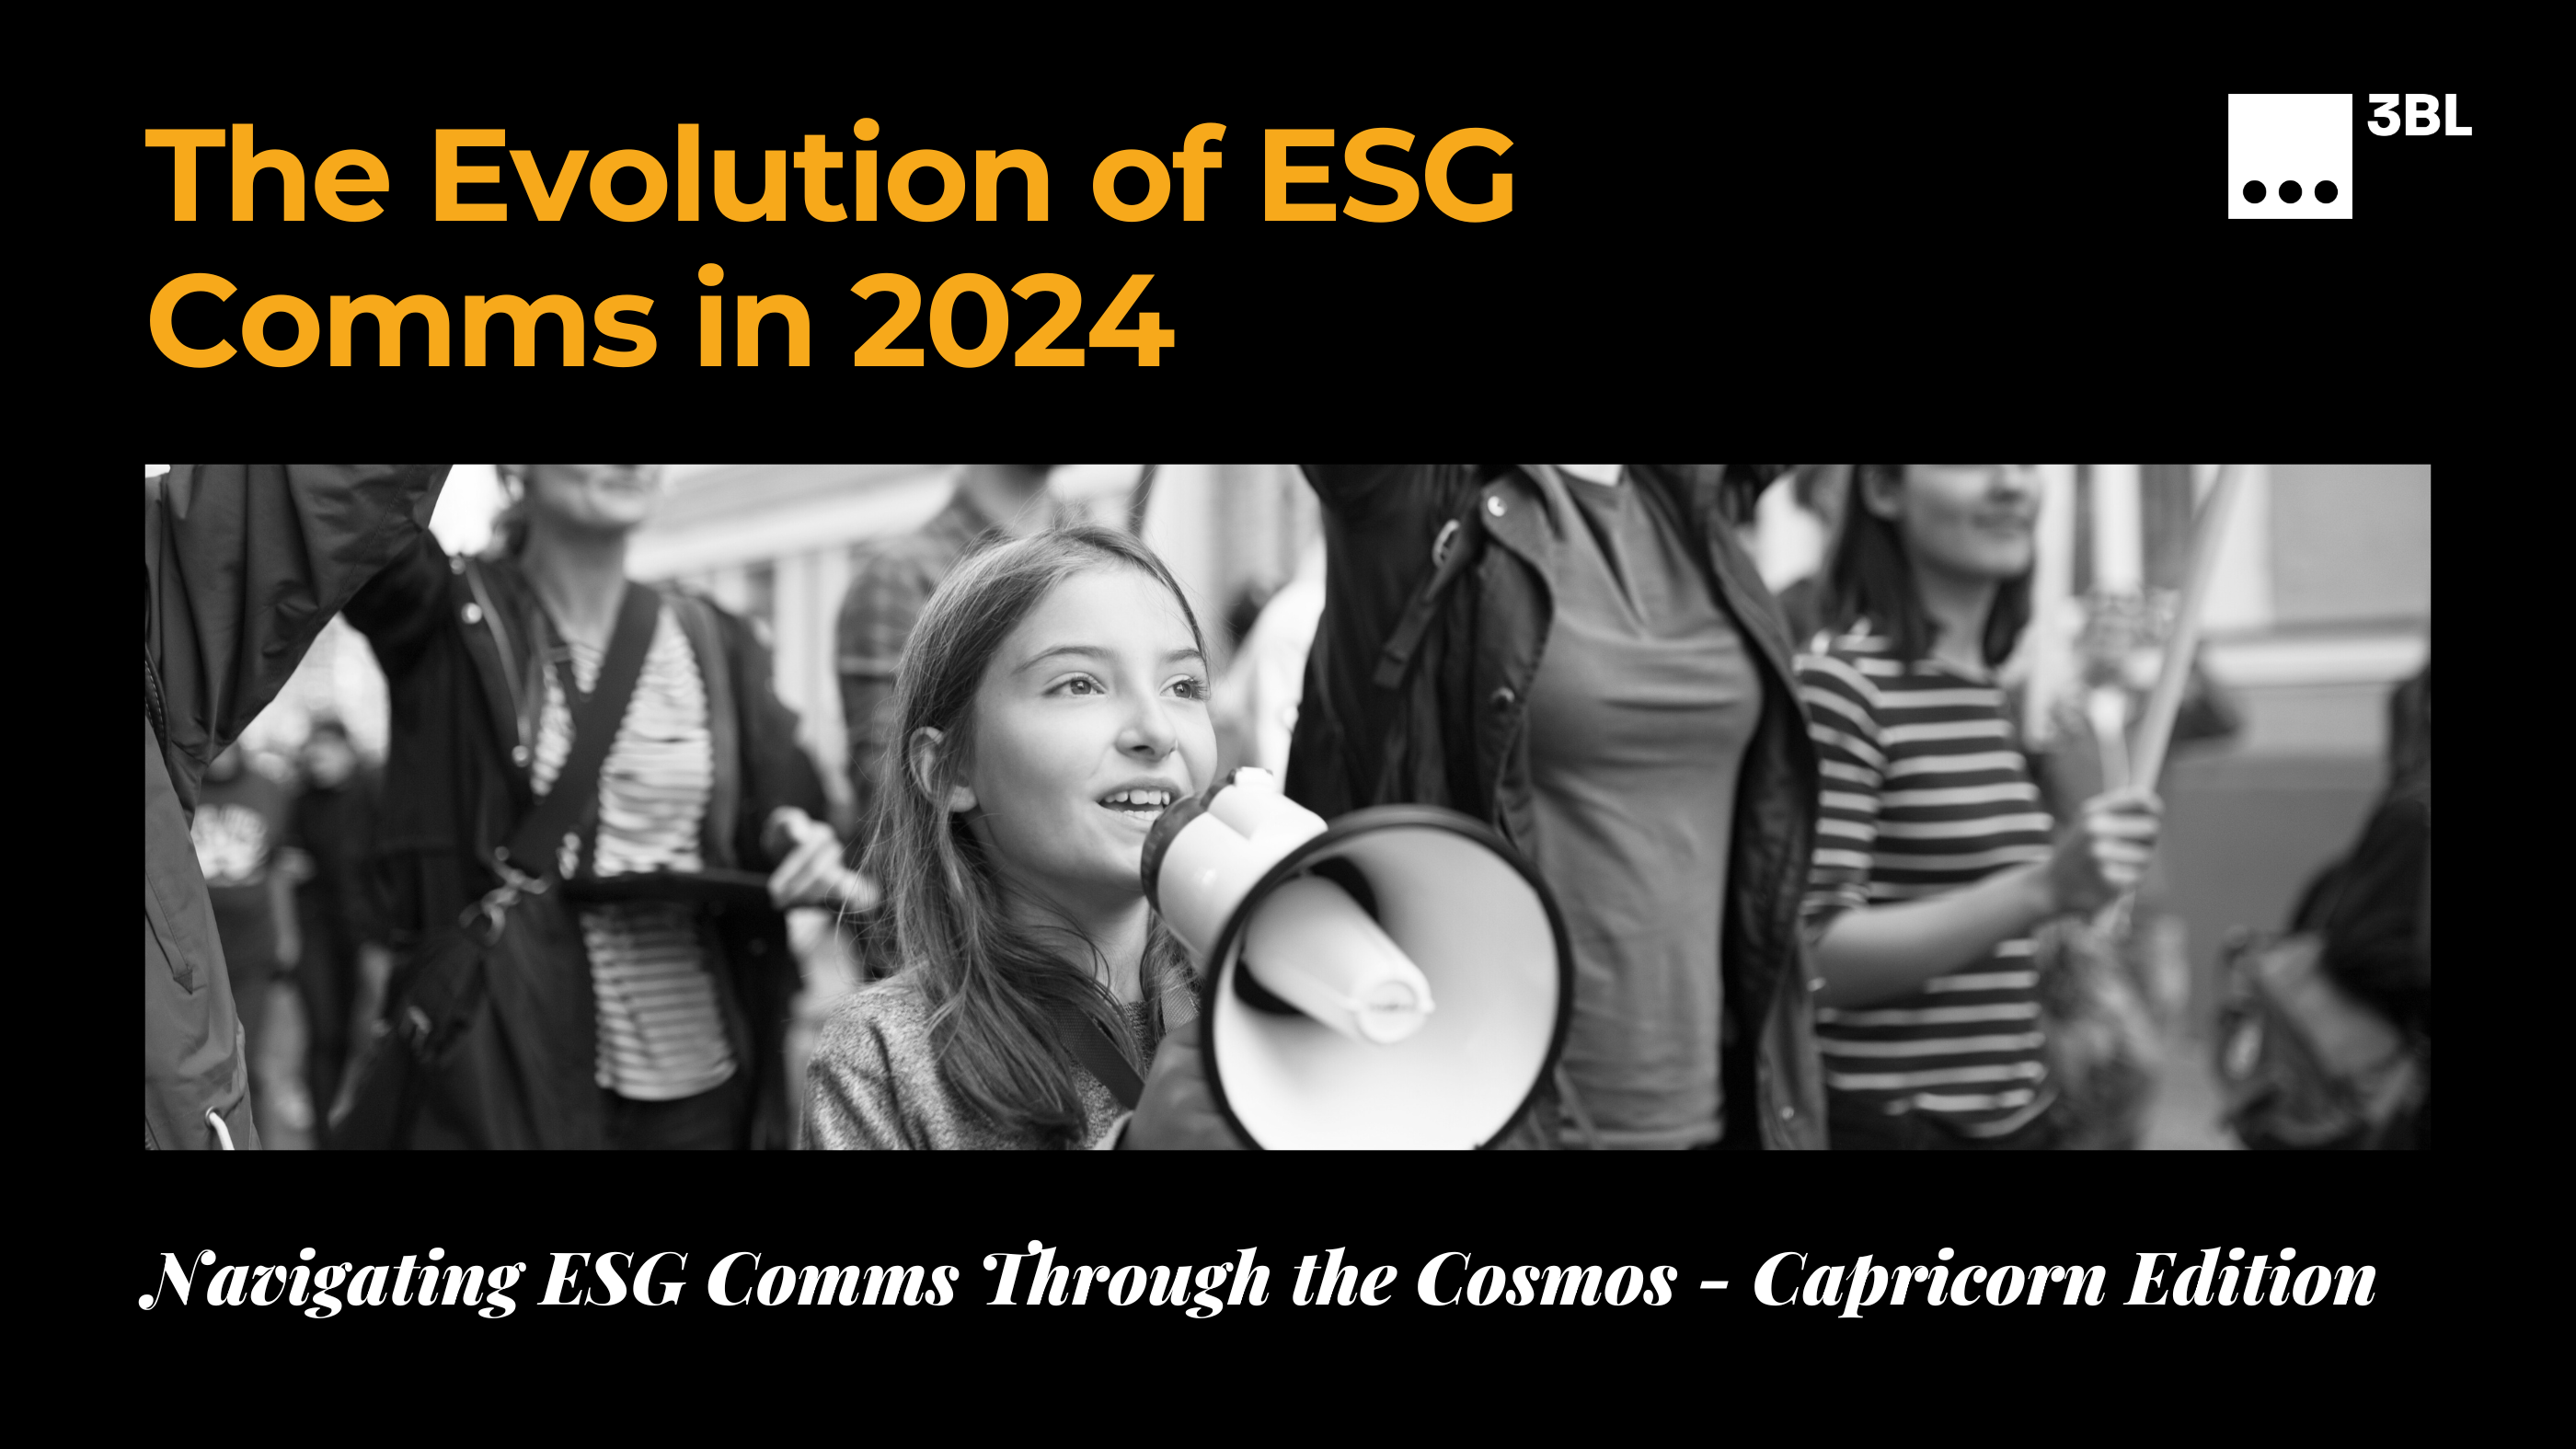 The Evolution of ESG Comms in 2024. Girl with megaphone pictured at rally. 